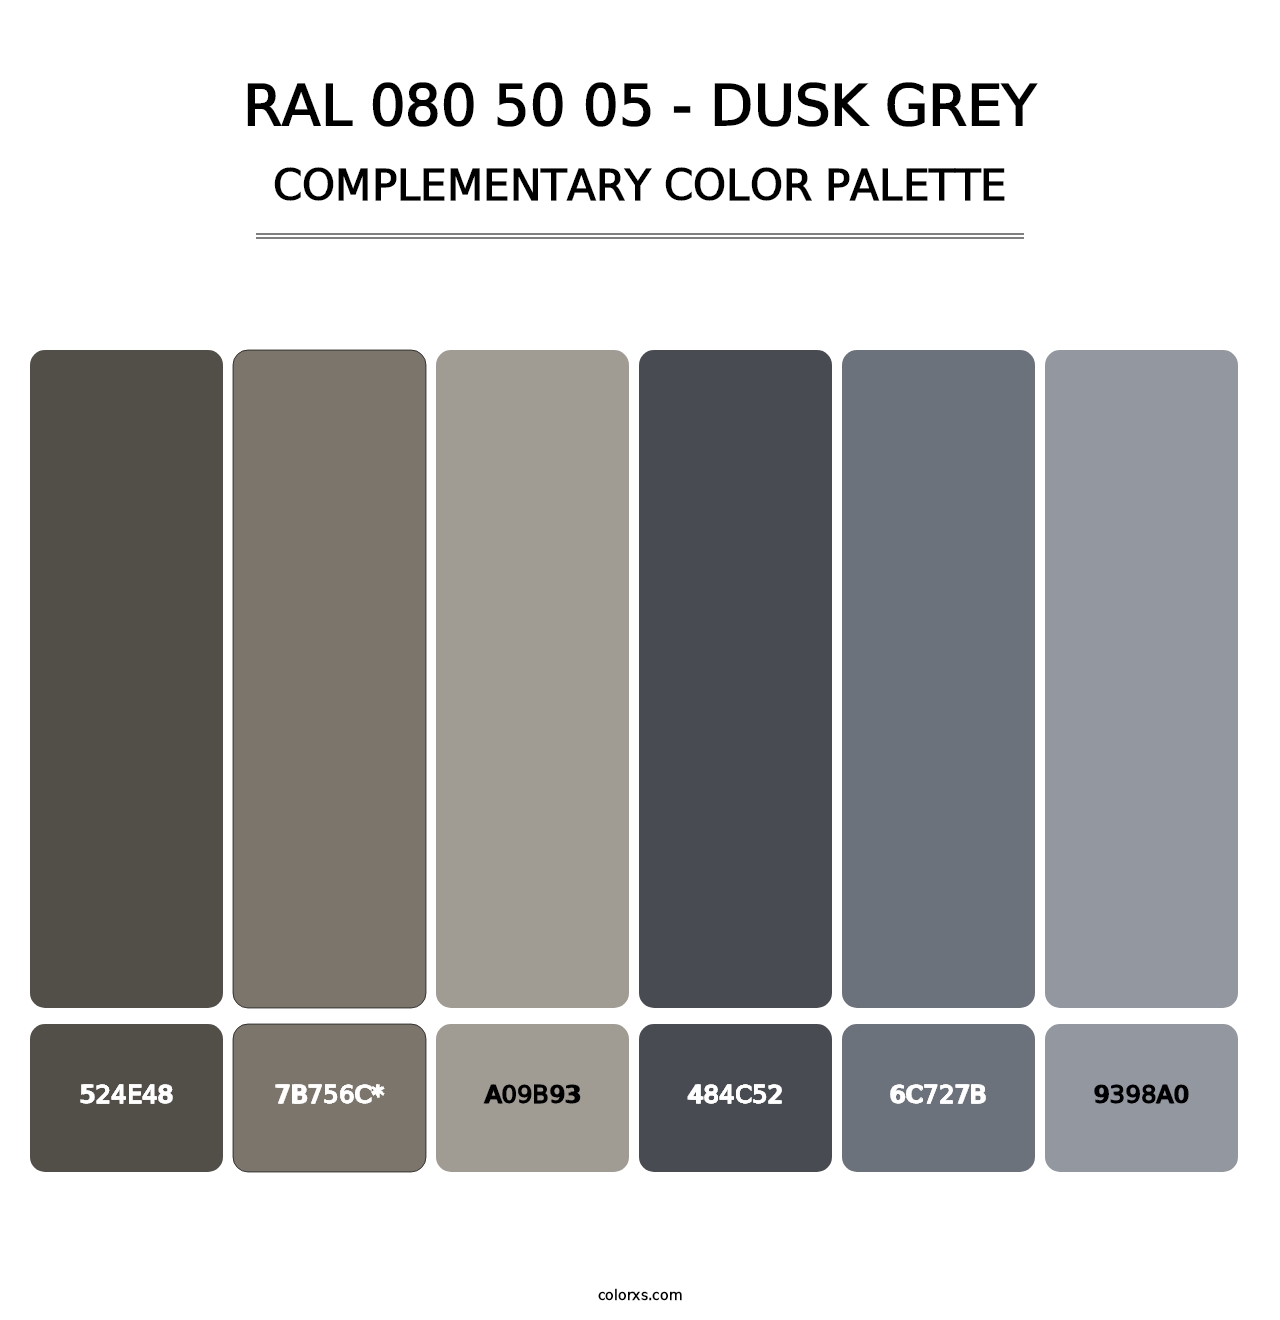 RAL 080 50 05 - Dusk Grey - Complementary Color Palette